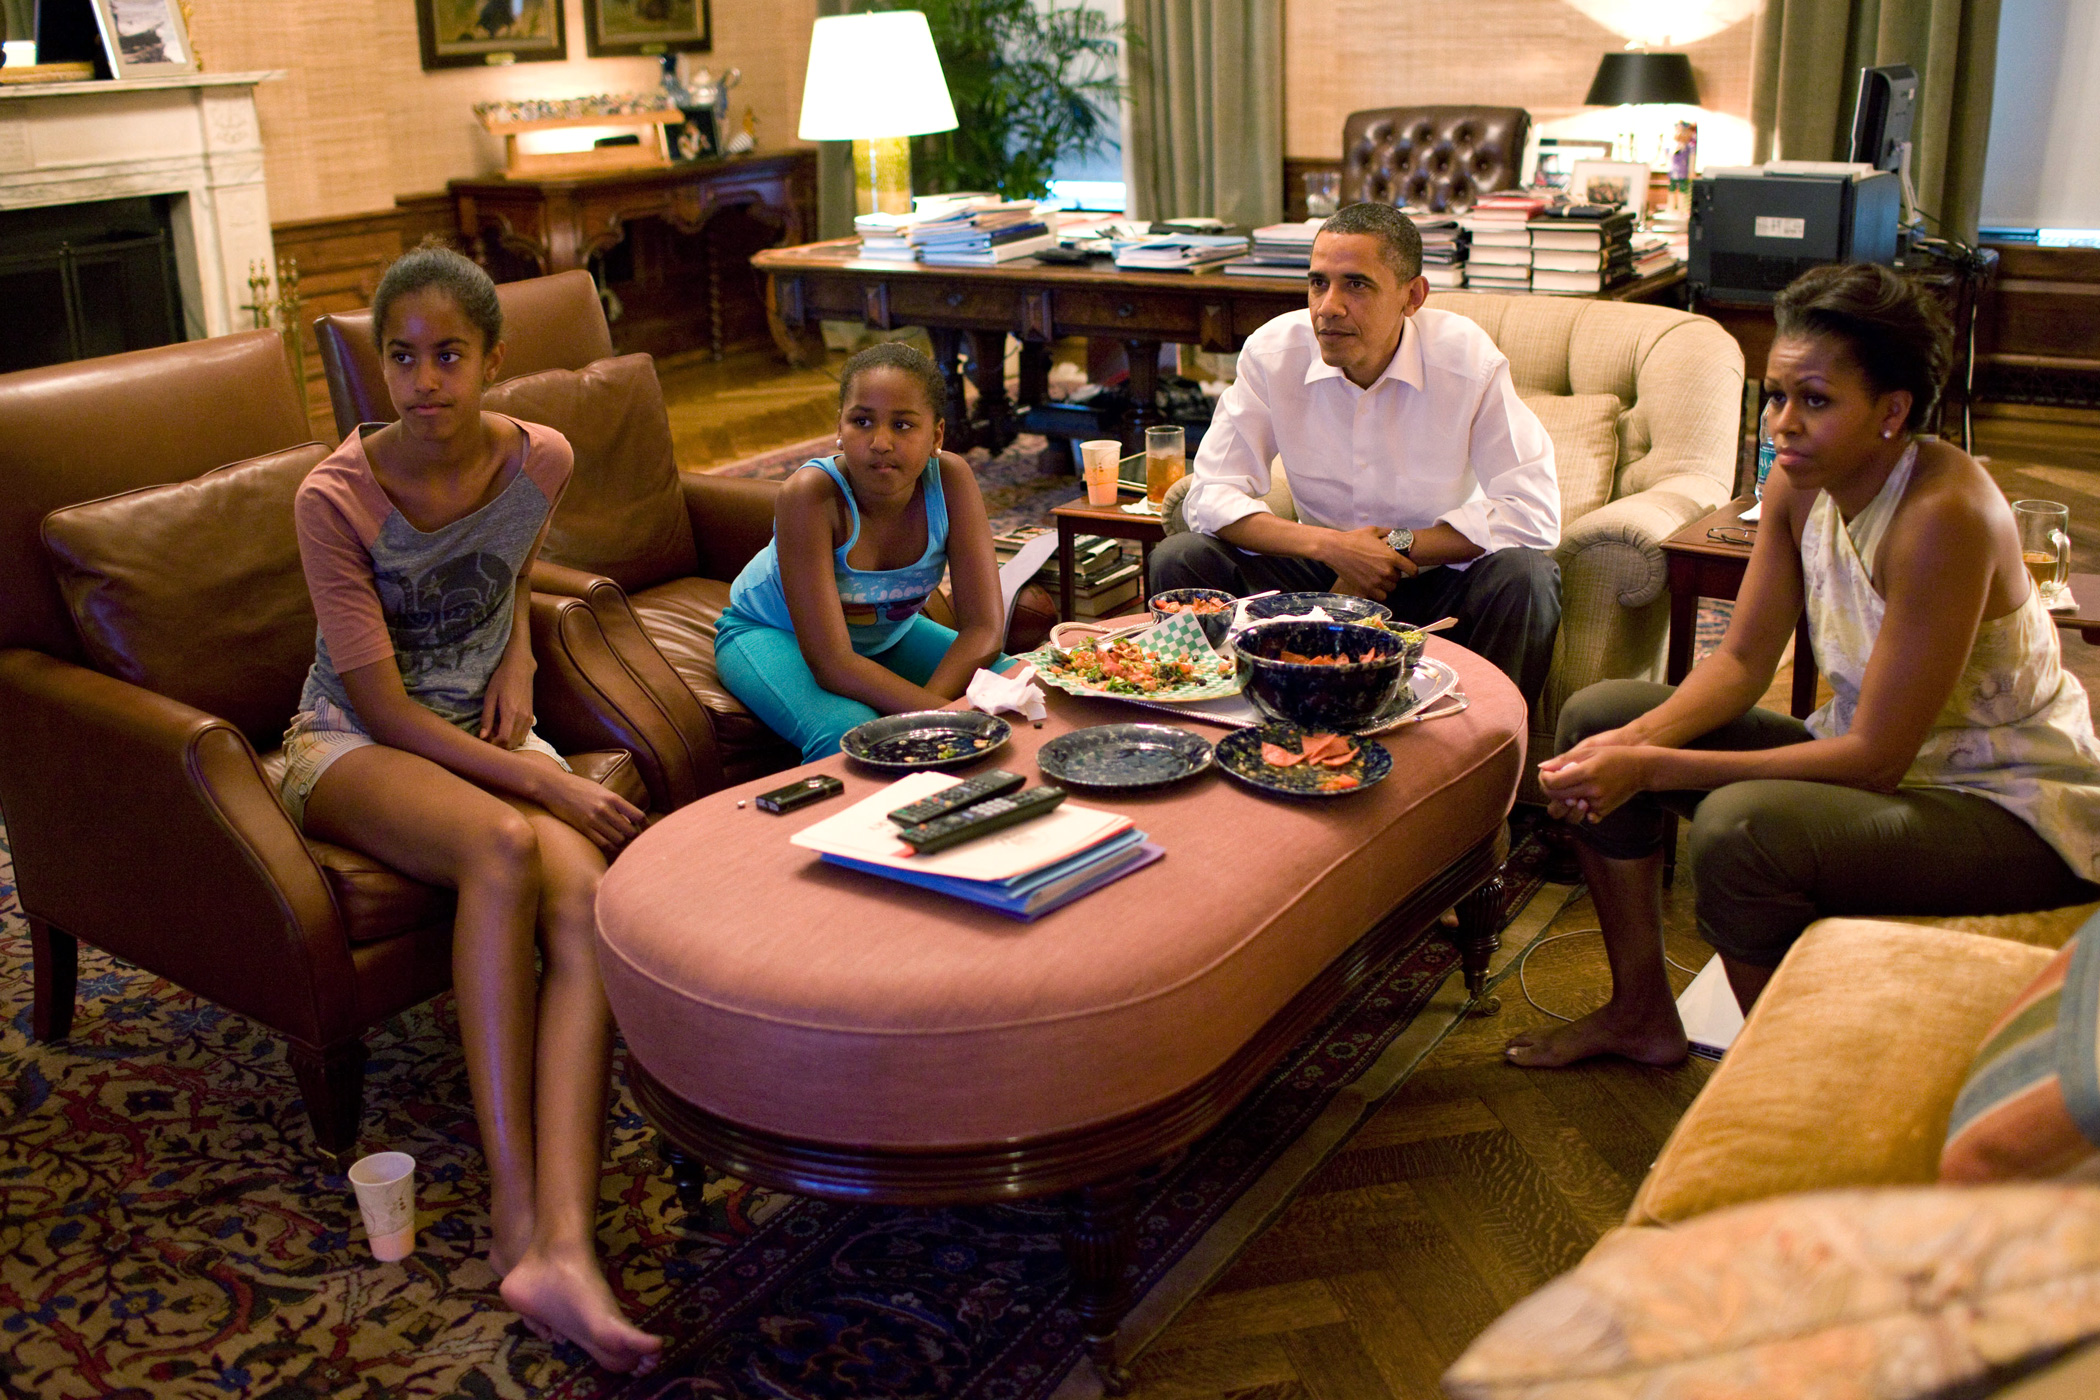 July 17, 2011 In this handout provided by the White House, President Barack Obama and first lady Michelle Obama with their daughters Sasha and Malia watch a World Cup soccer match from the Treaty Room office in the residence of the White House.